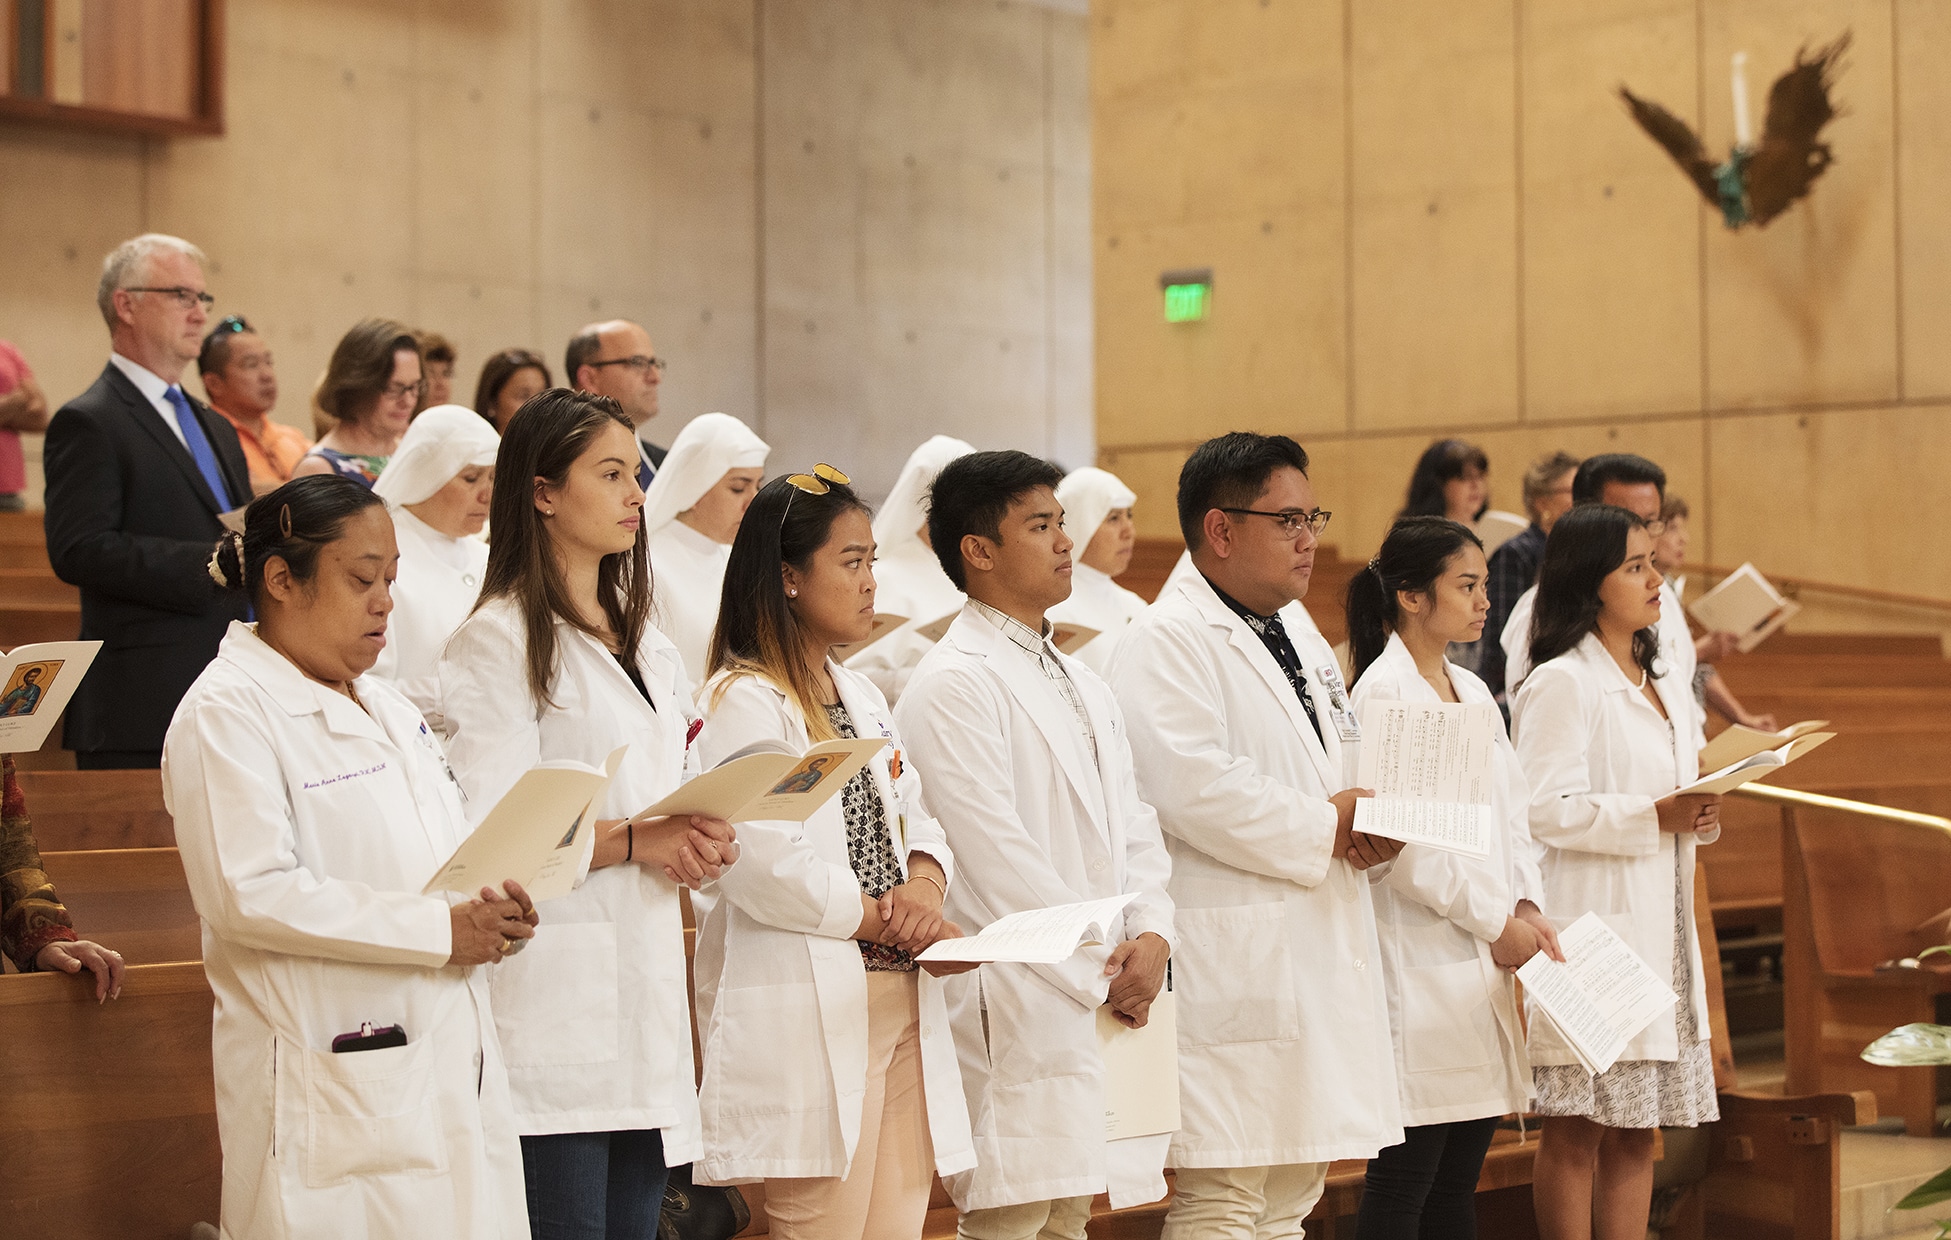 Nursing students from Mount St. Mary’s University and women religious of the Sister Servants of Mary, Ministers to the Sick at the 2017 White Mass